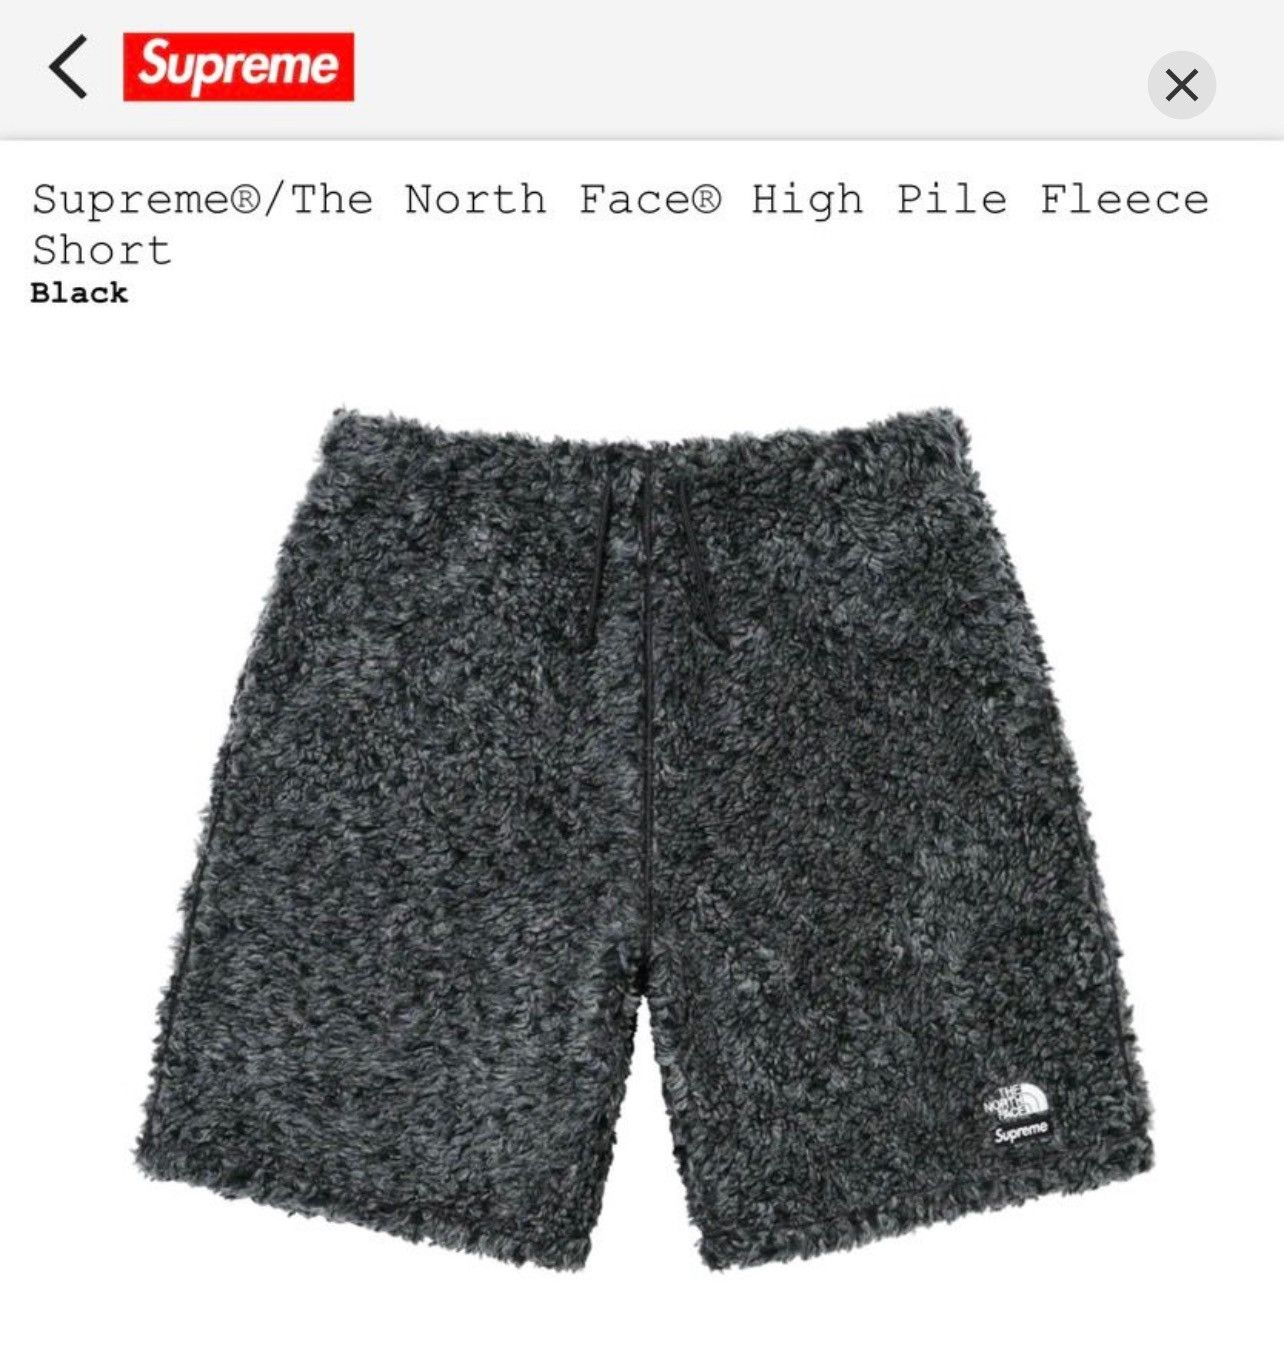 Supreme SS23 Supreme x The North Face High Pile Fleece Shorts | Grailed